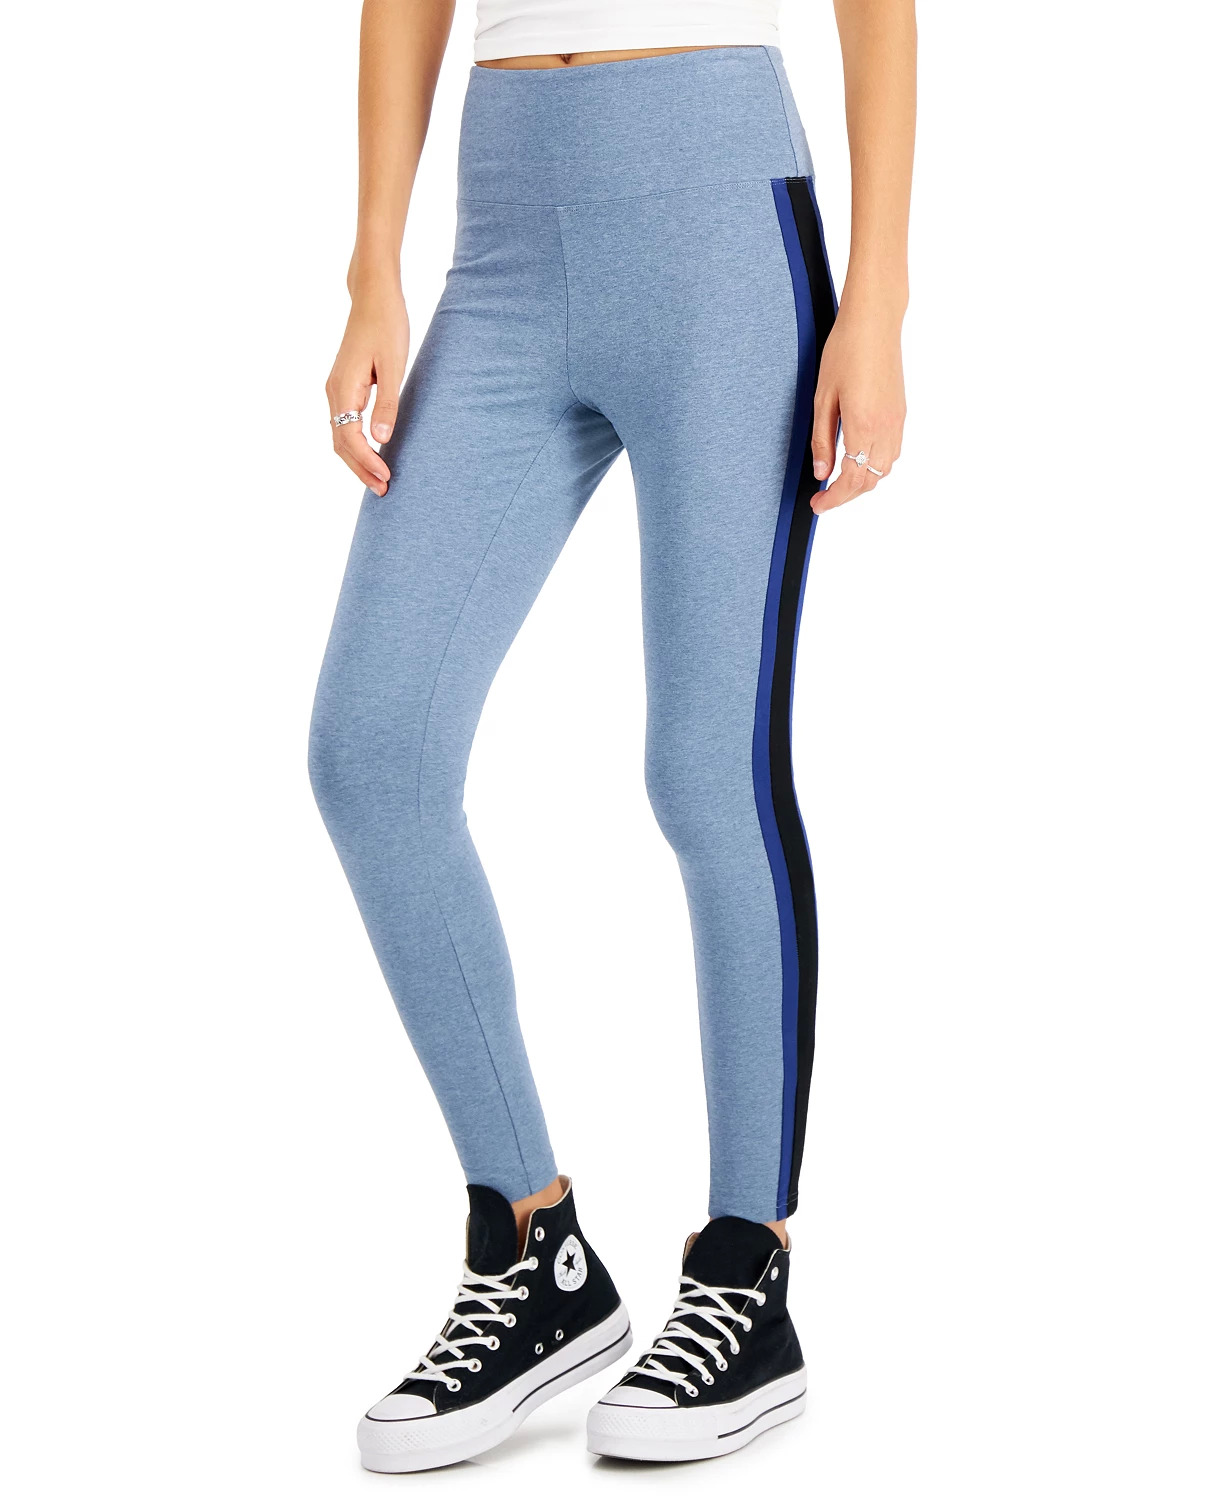 Style & Co Women's Side-Stripe Leggings (Blue Heather) $6.93 & More + SD Cashback + Free Store Pickup at Macy's or FS on $25+